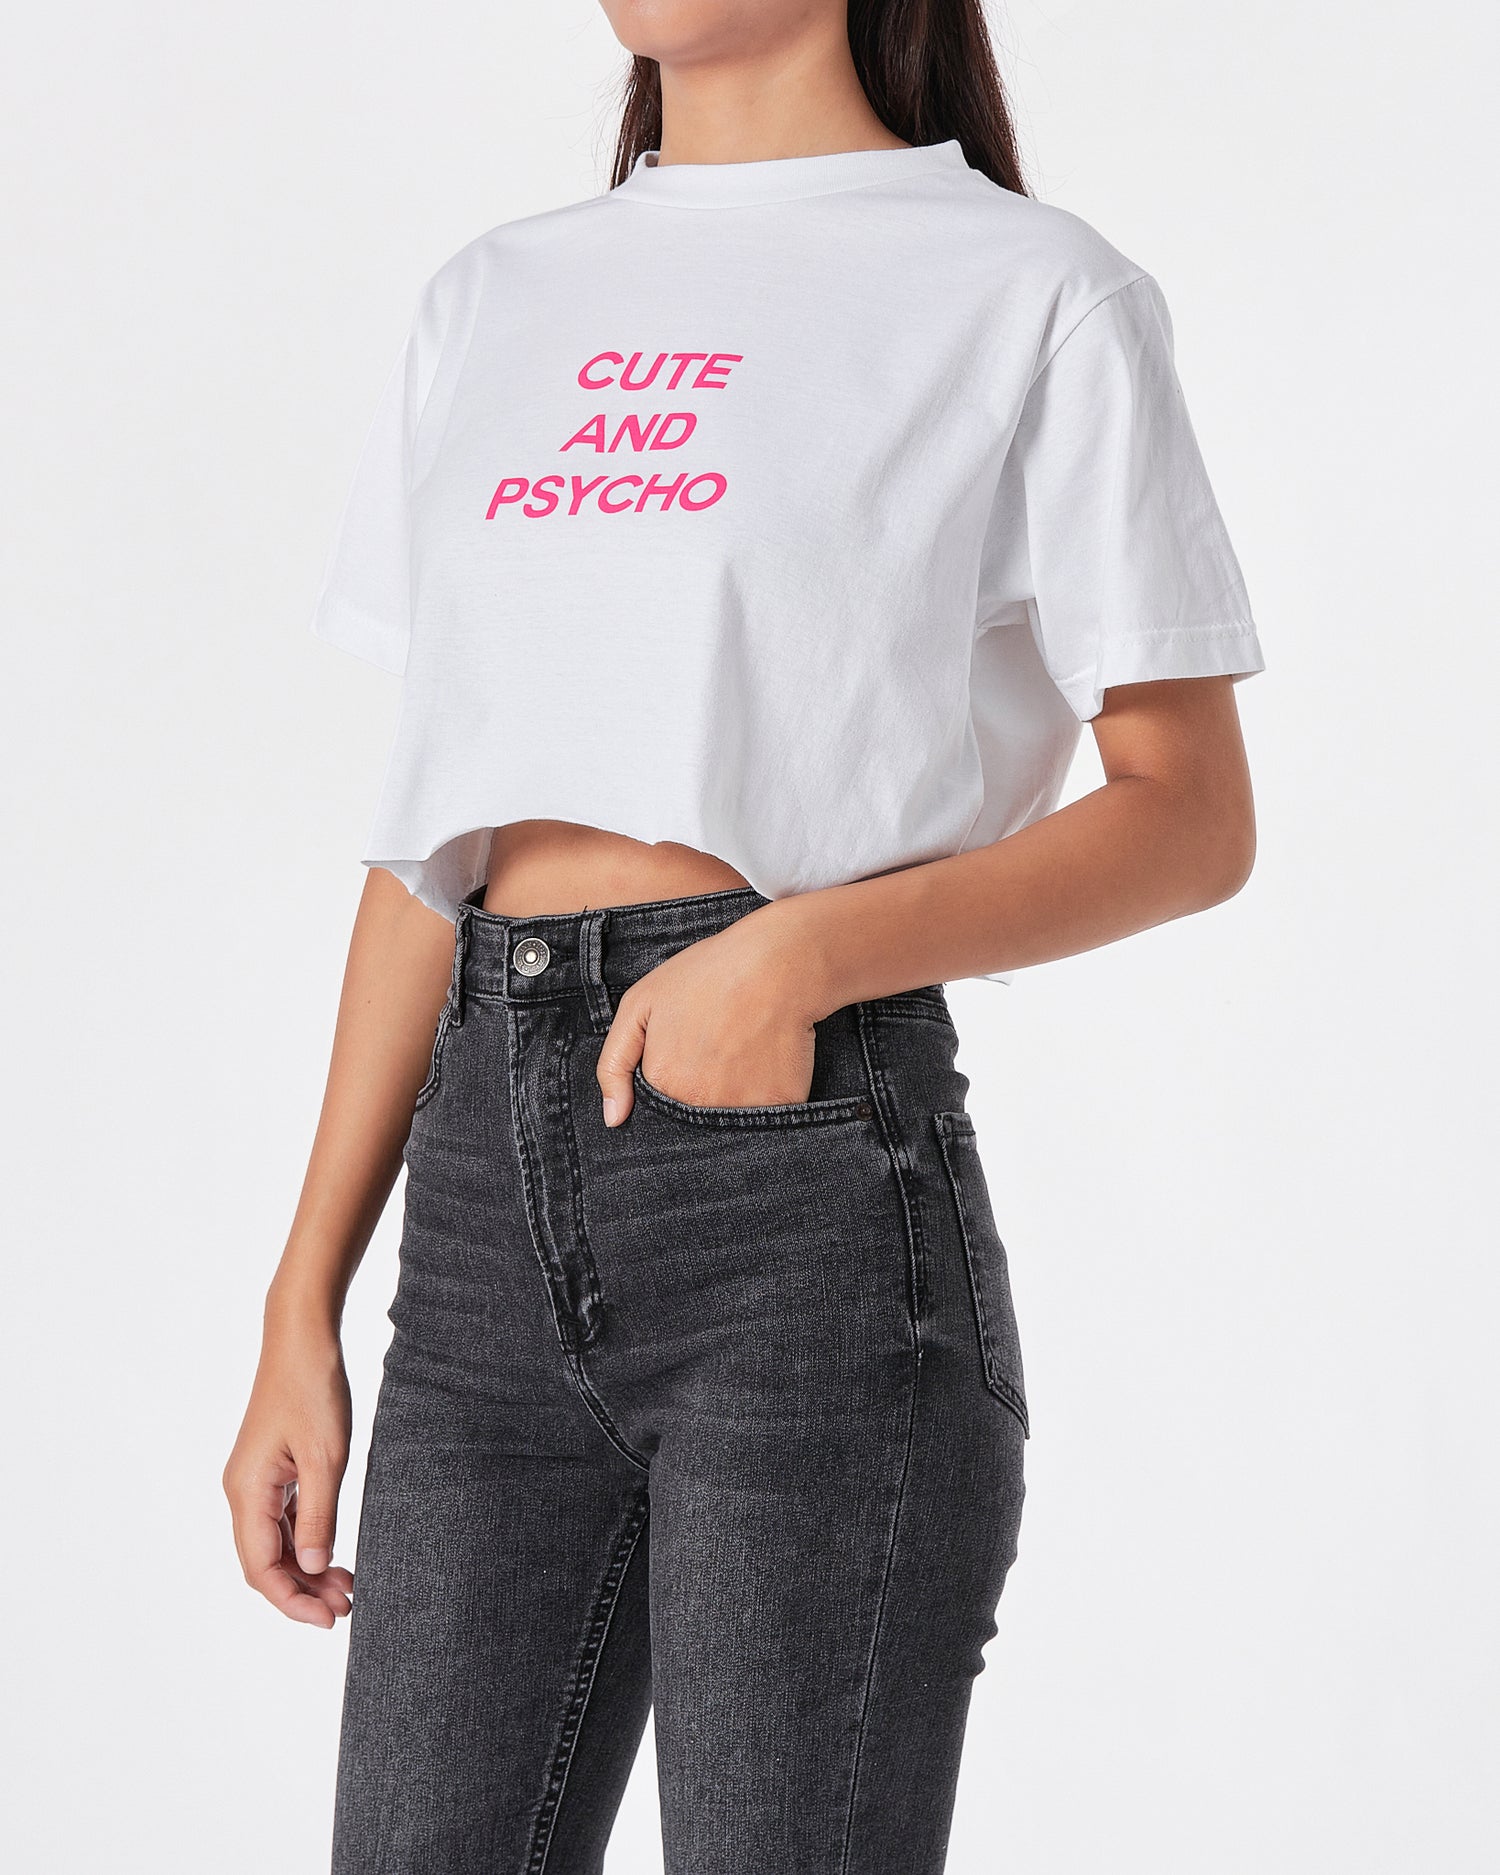 Cute And Psycho Lady White T-Shirt Crop Top 9.90